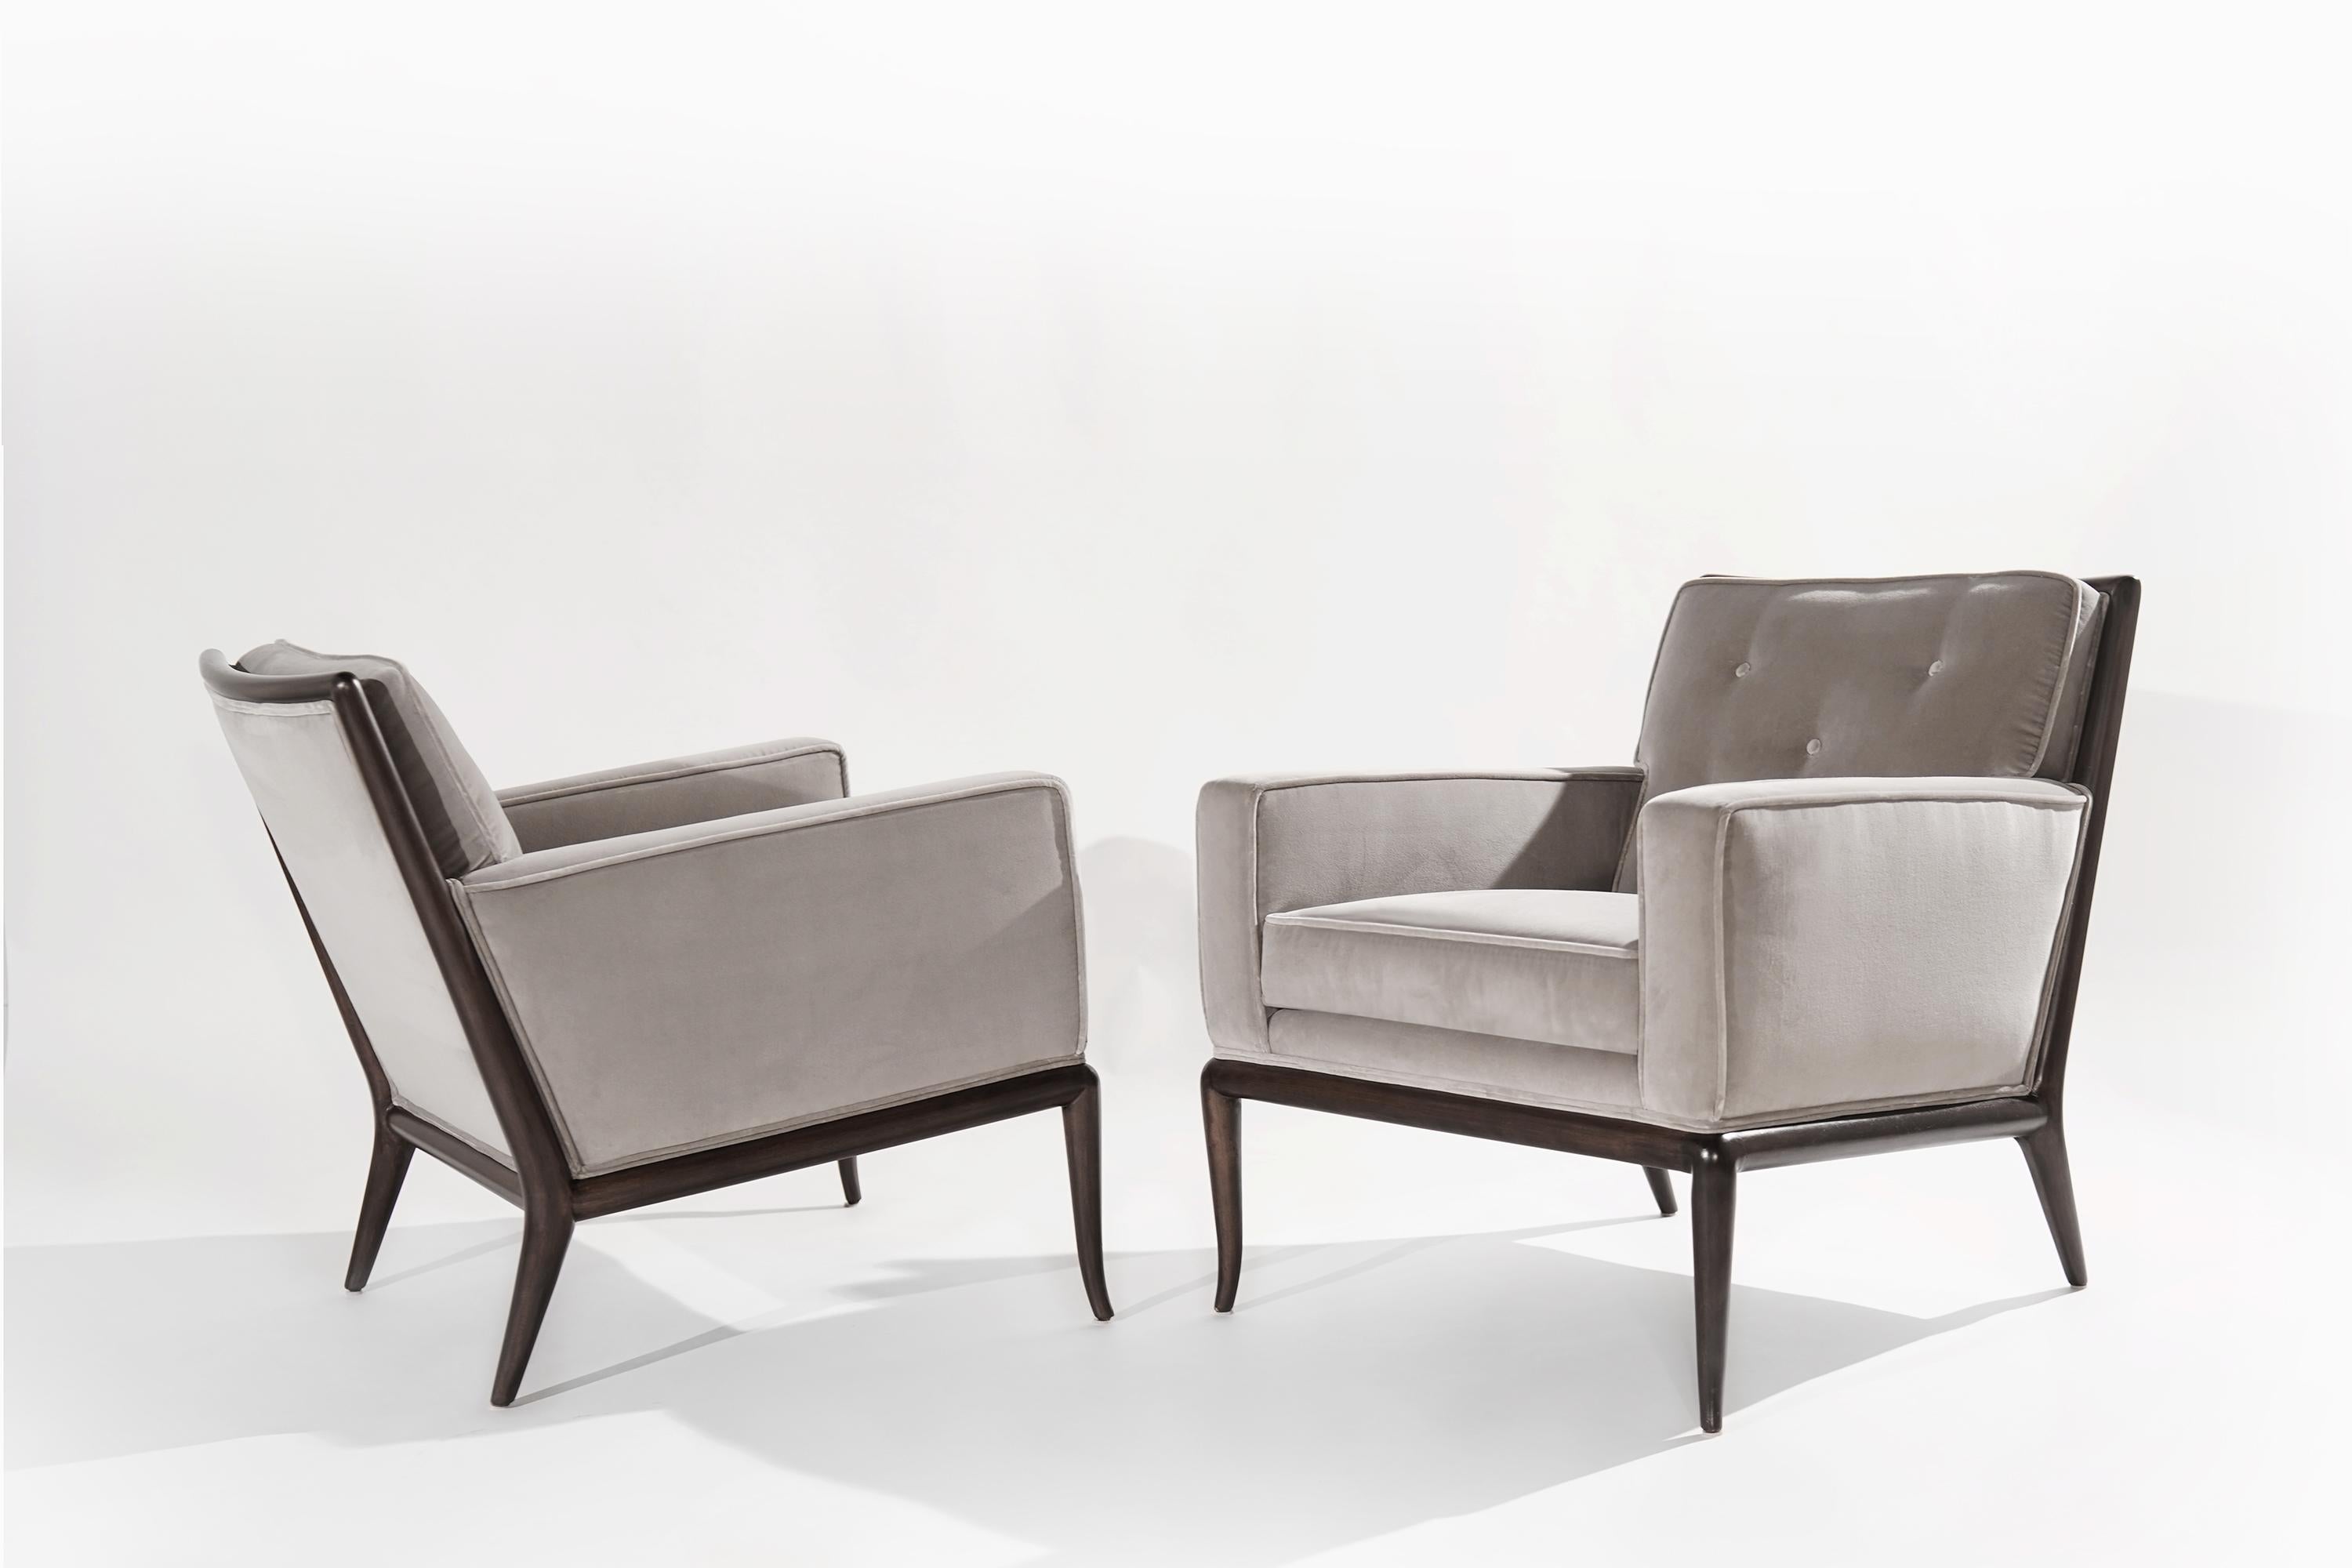 Mid-Century Modern Pair of Club Chairs by T.H. Robsjohn-Gibbings for Widdicomb, 1950s